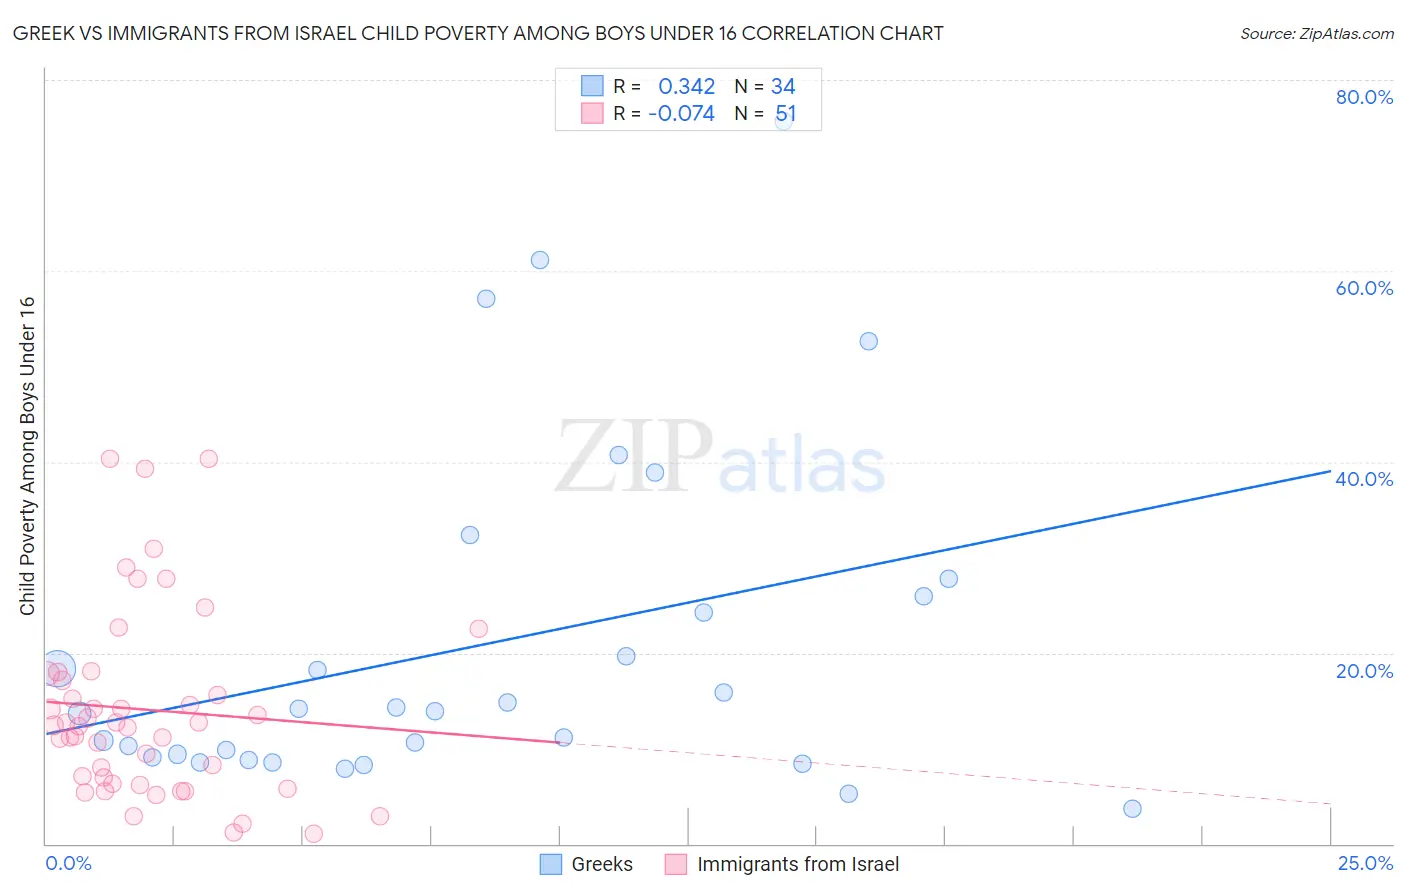 Greek vs Immigrants from Israel Child Poverty Among Boys Under 16